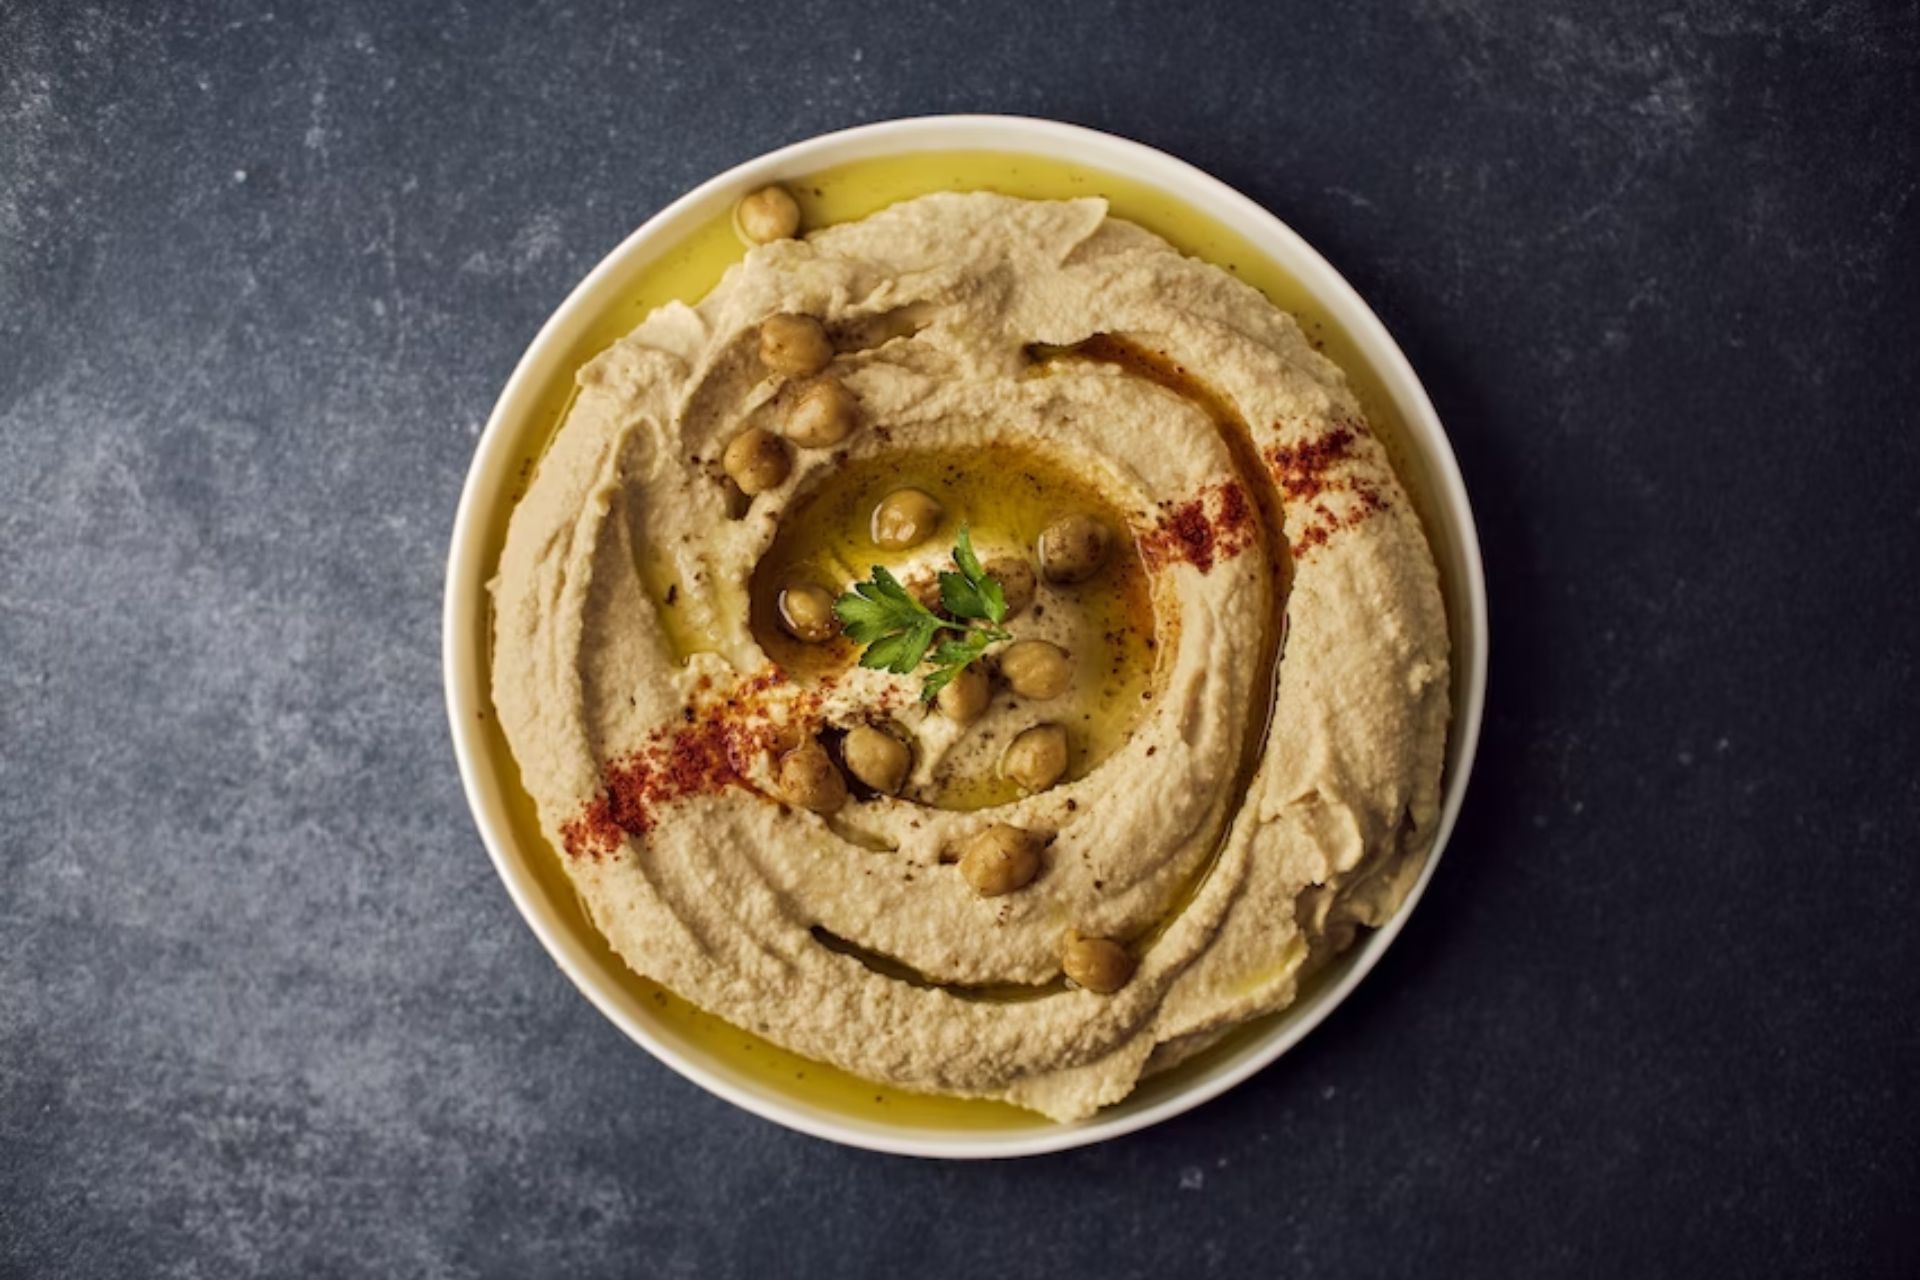 A bowl of hummus with spices and roasted chickpeas, one of the diabetes-friendly snacks listed in the post.